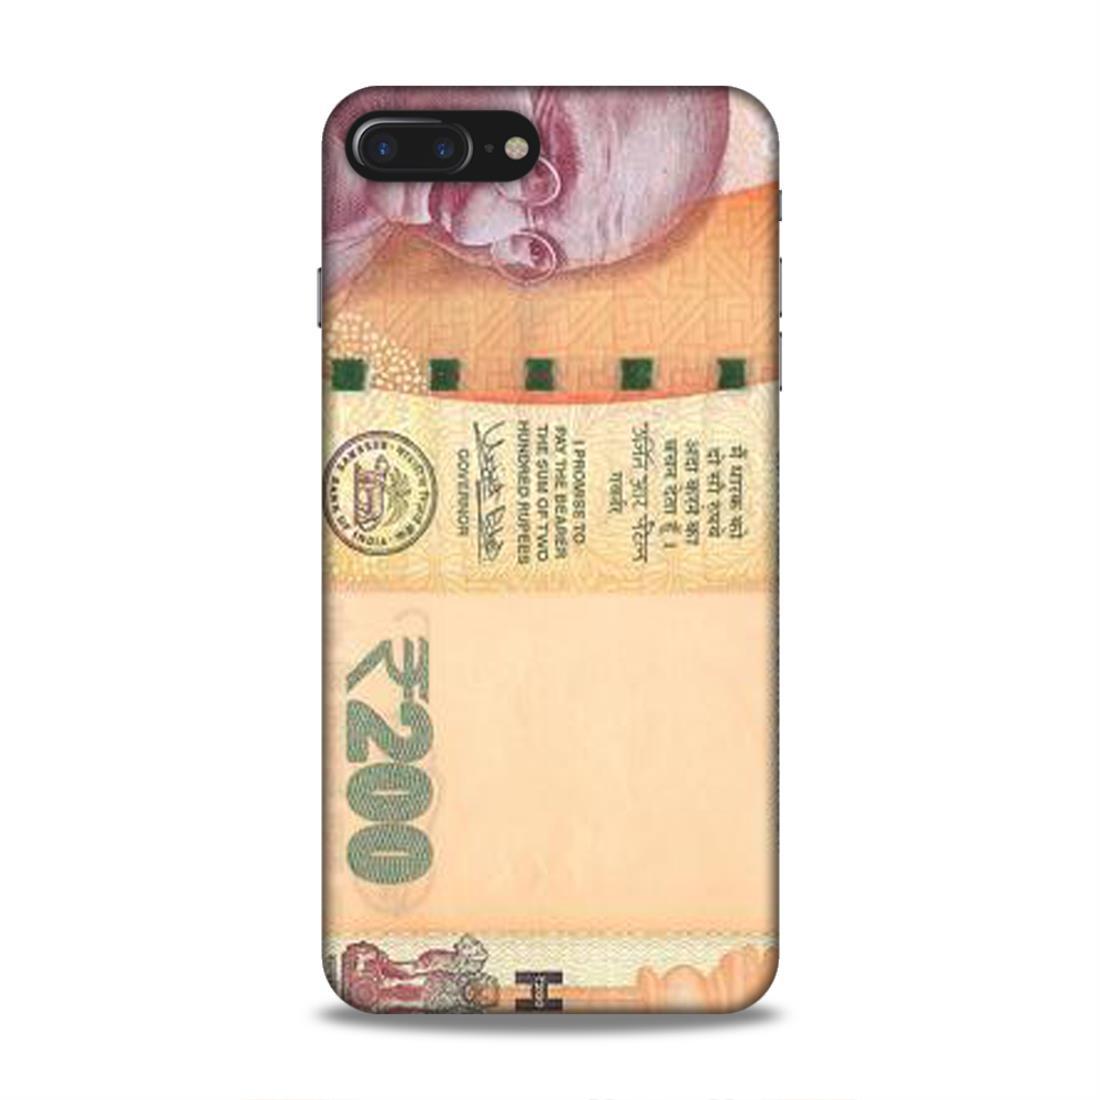 Rs 200 Currency Note iPhone 8 Plus Phone Case Cover